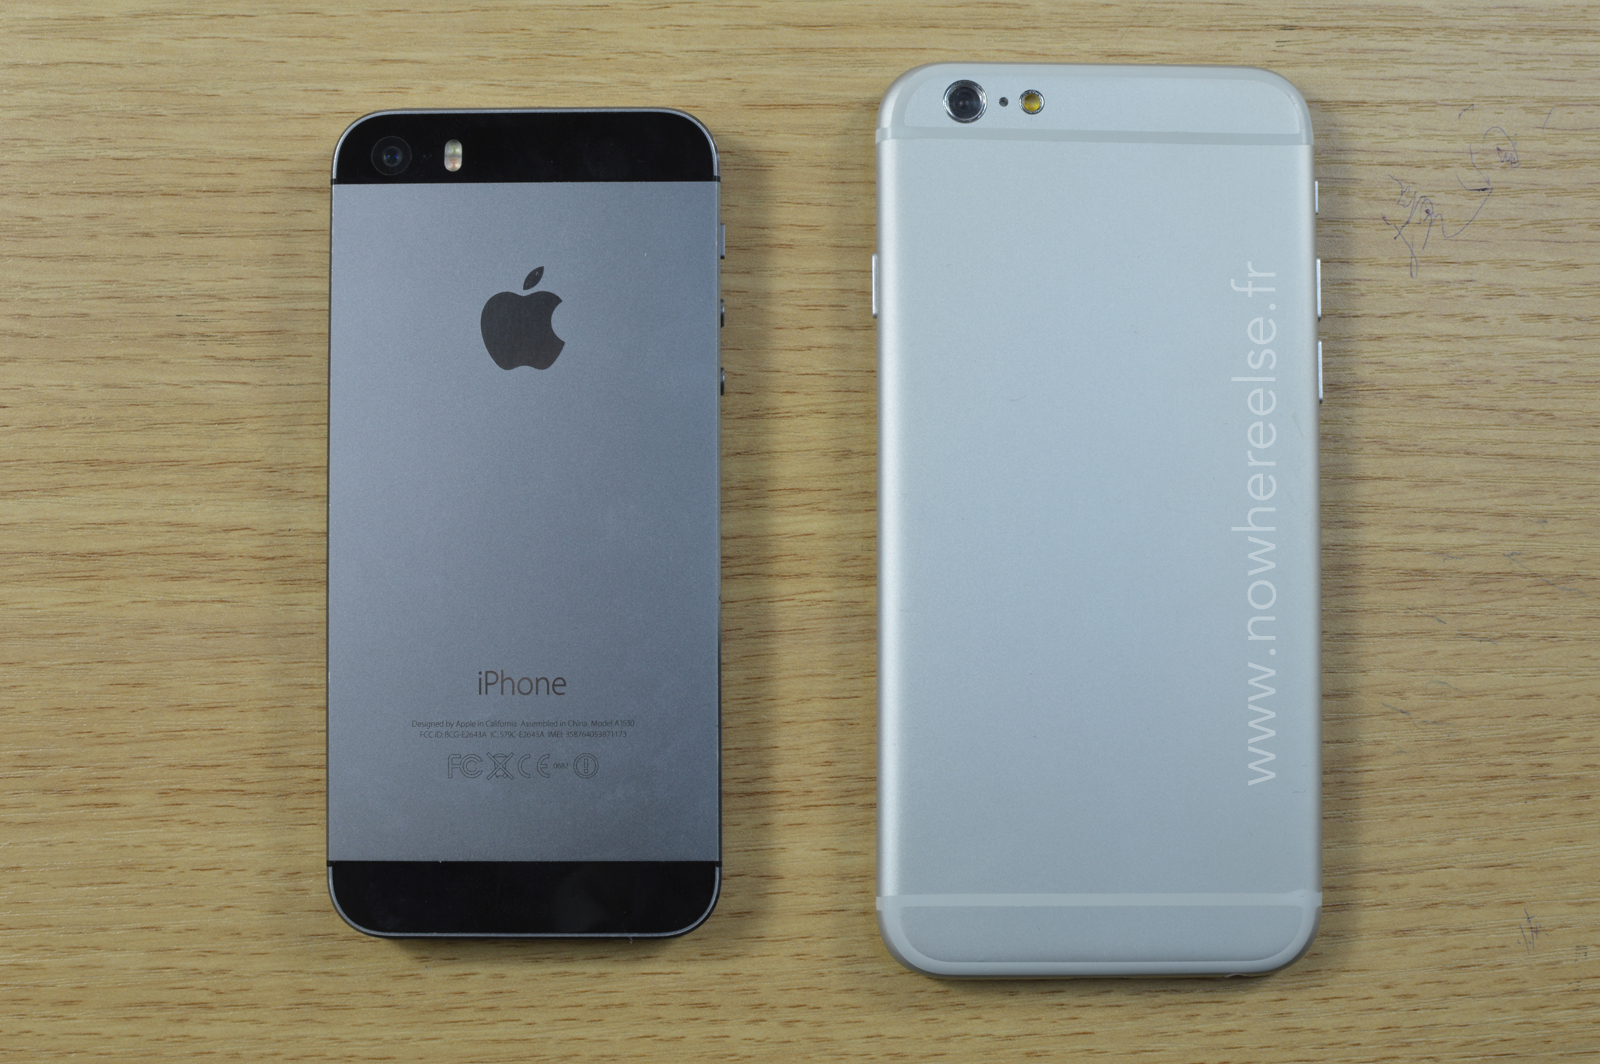 iPhone 6 vs iPhone 5s: 5 Things to Know About the Big iPhone